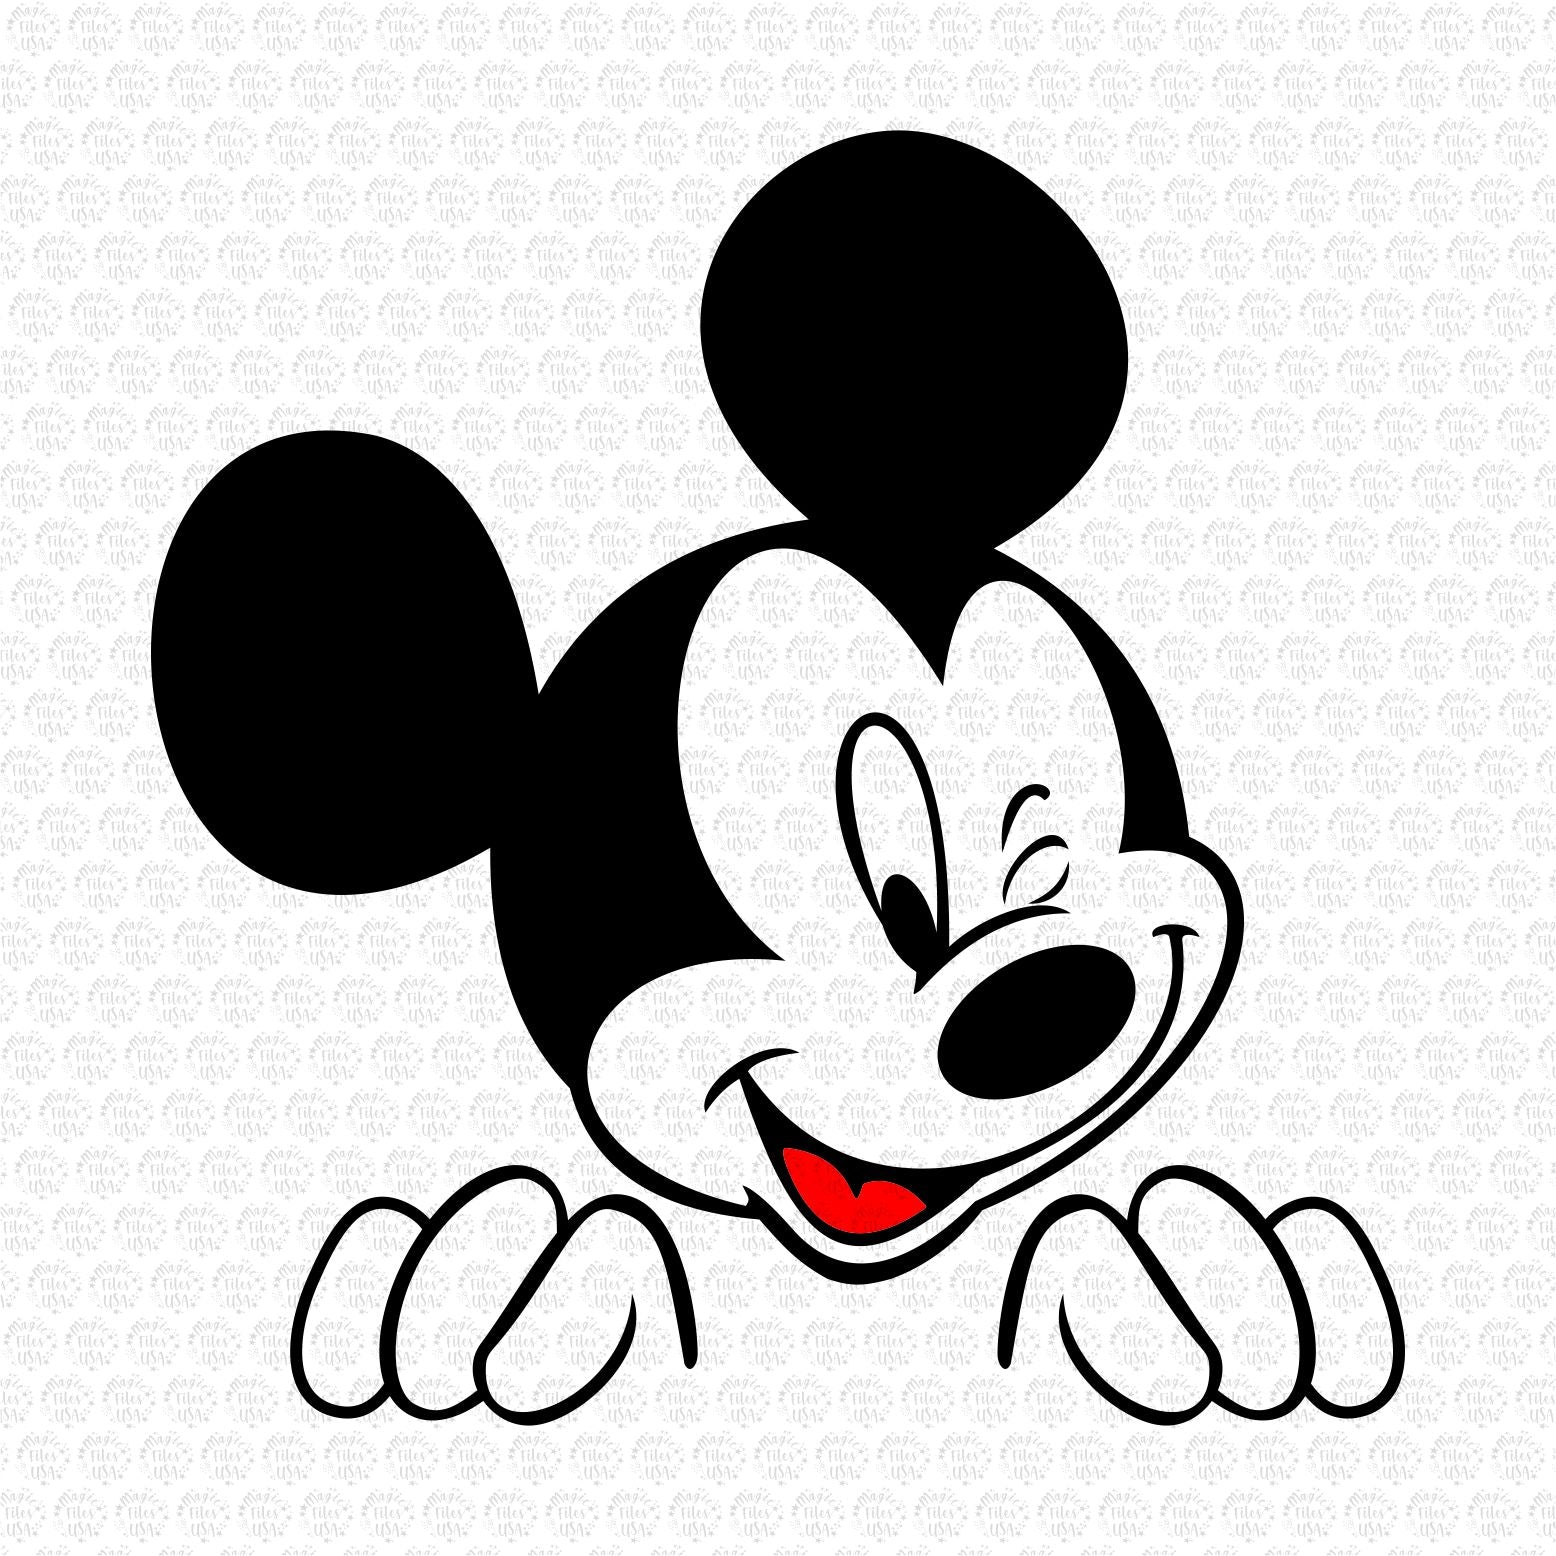 How to Draw Mickey Mouse Step by Step - DrawingNow